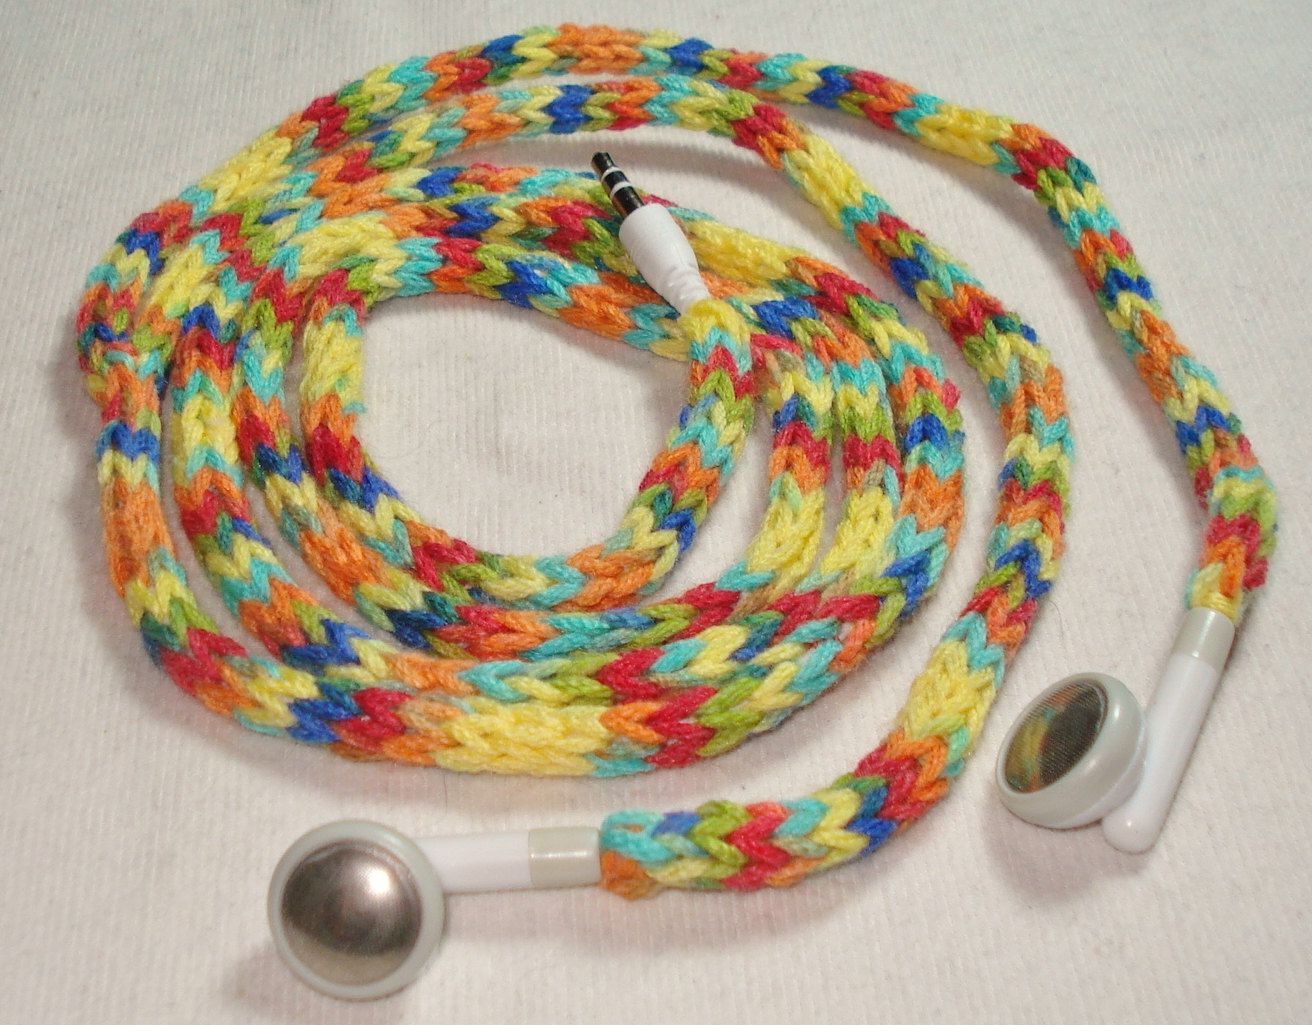 Hand-knit earbud sweaters: How to fix earbud tangles: